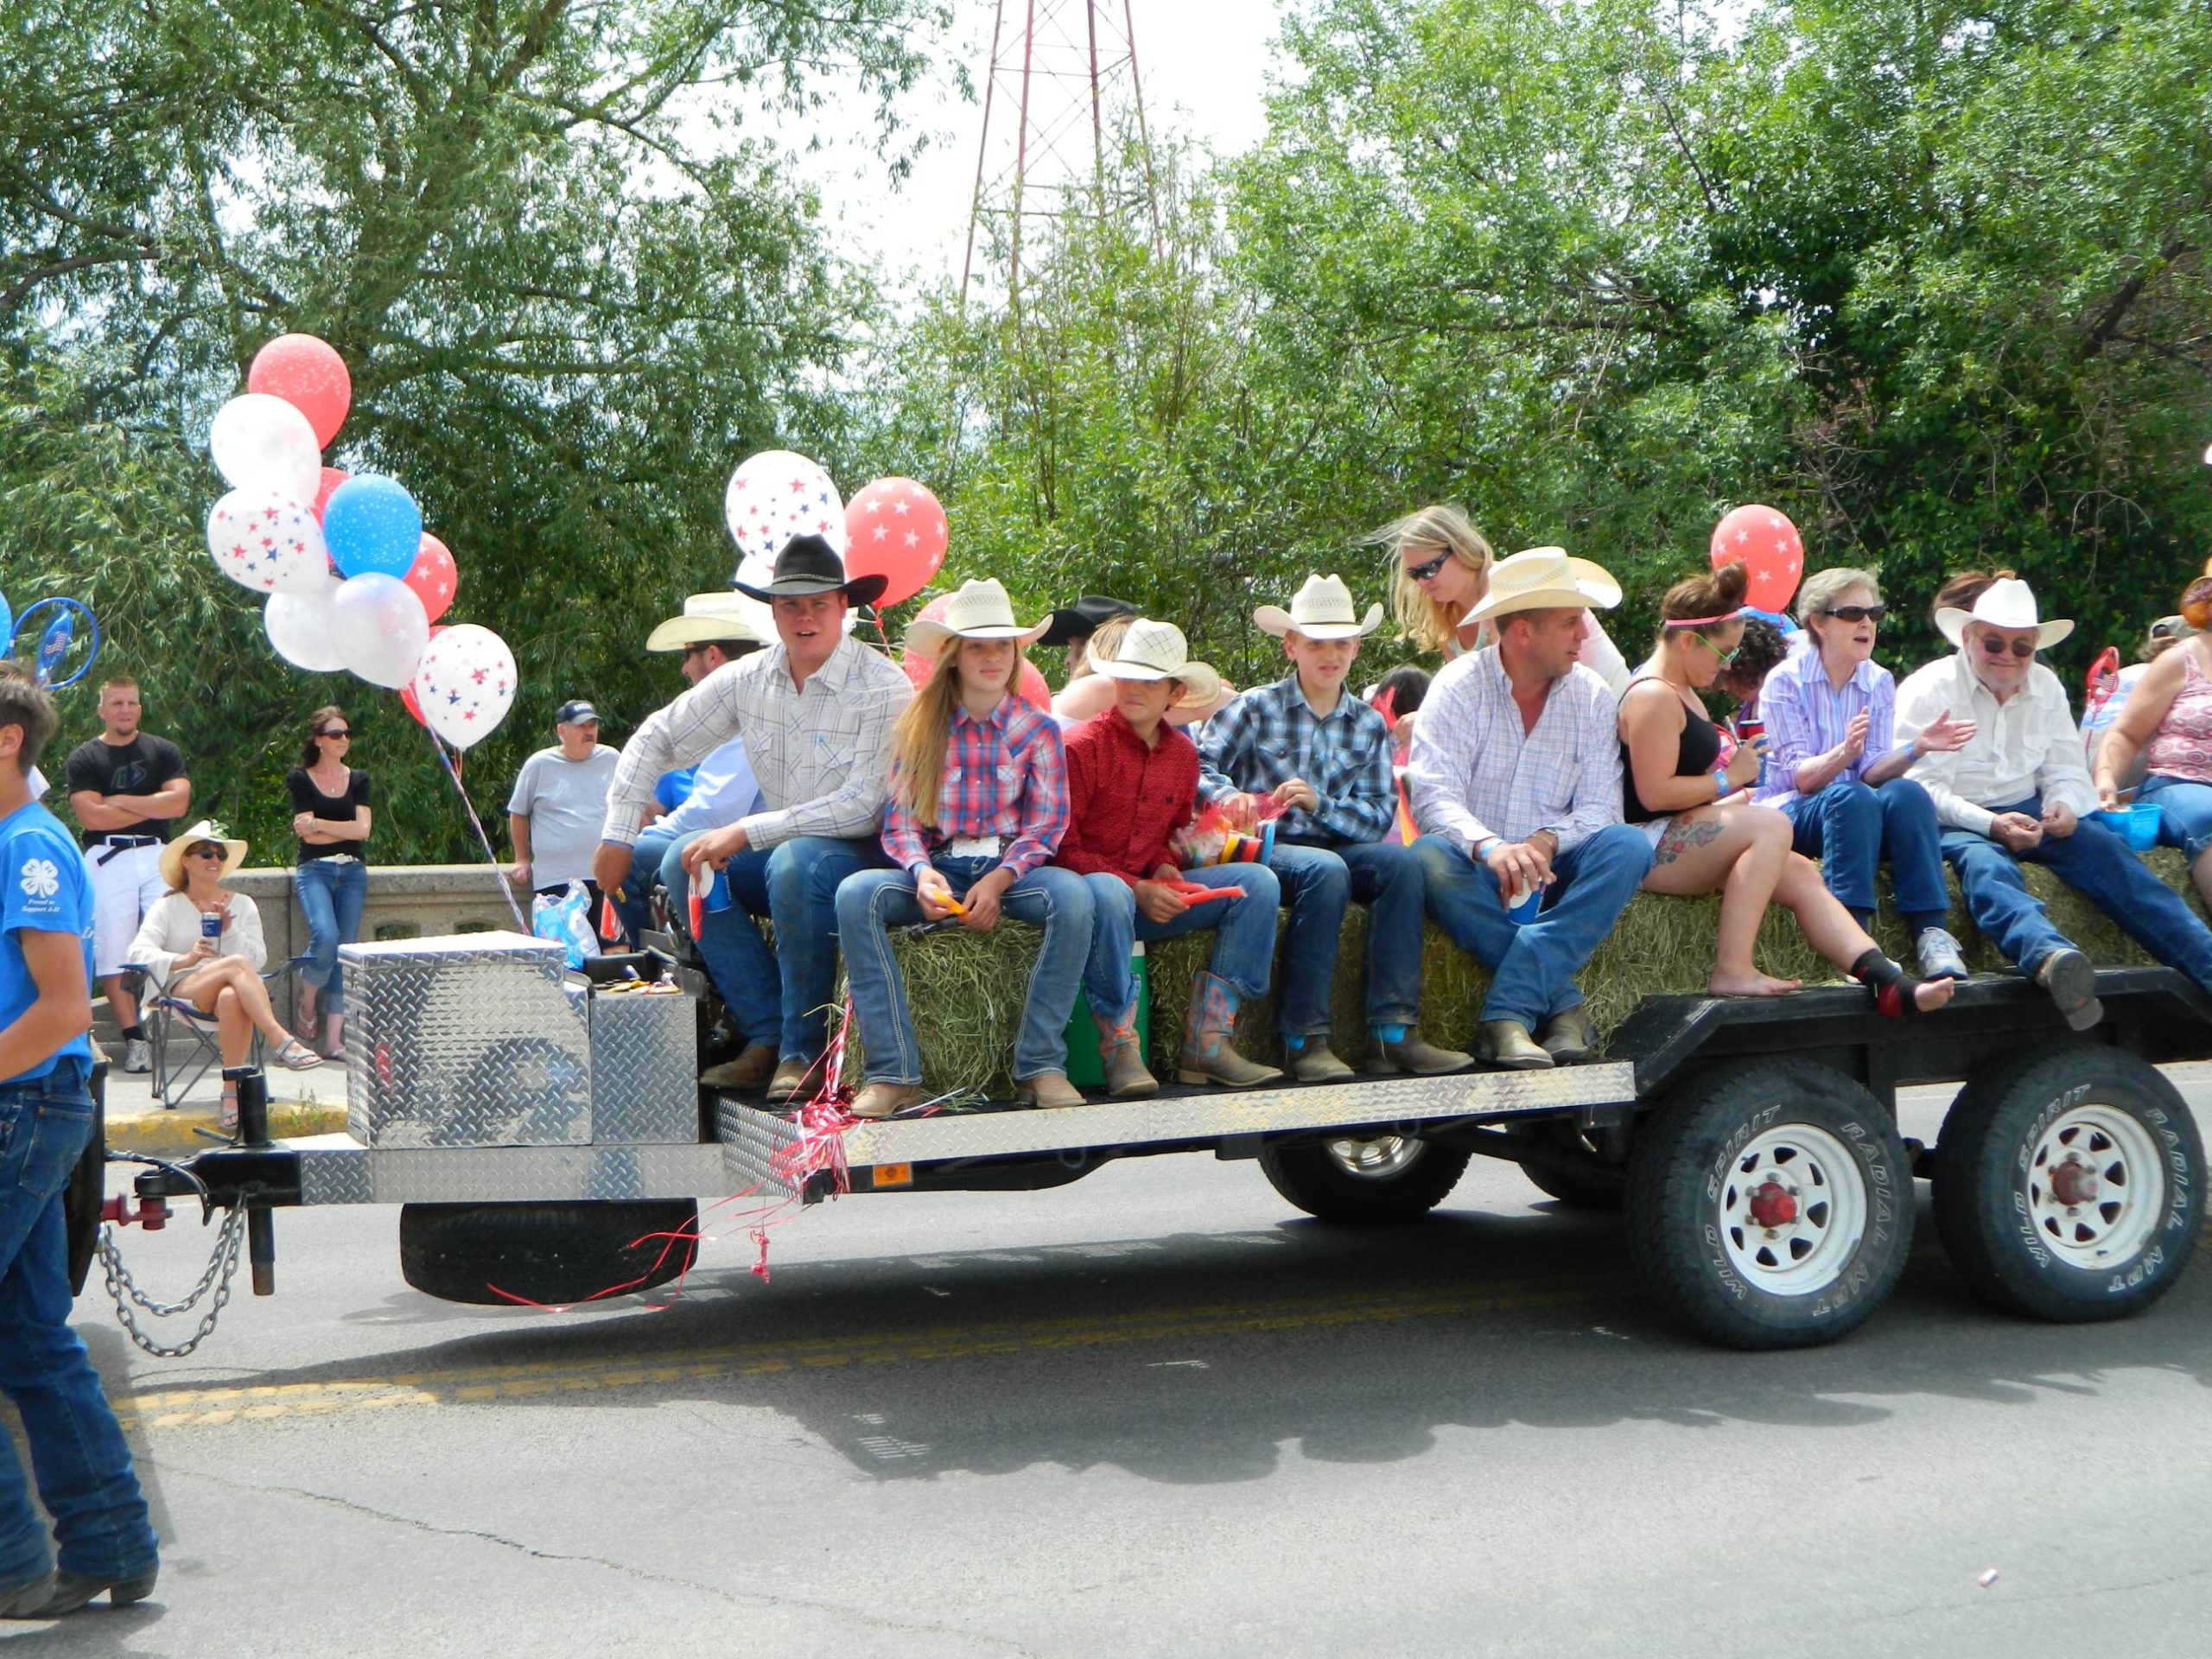 East Helena Valley Rodeo Parade City of East Helena